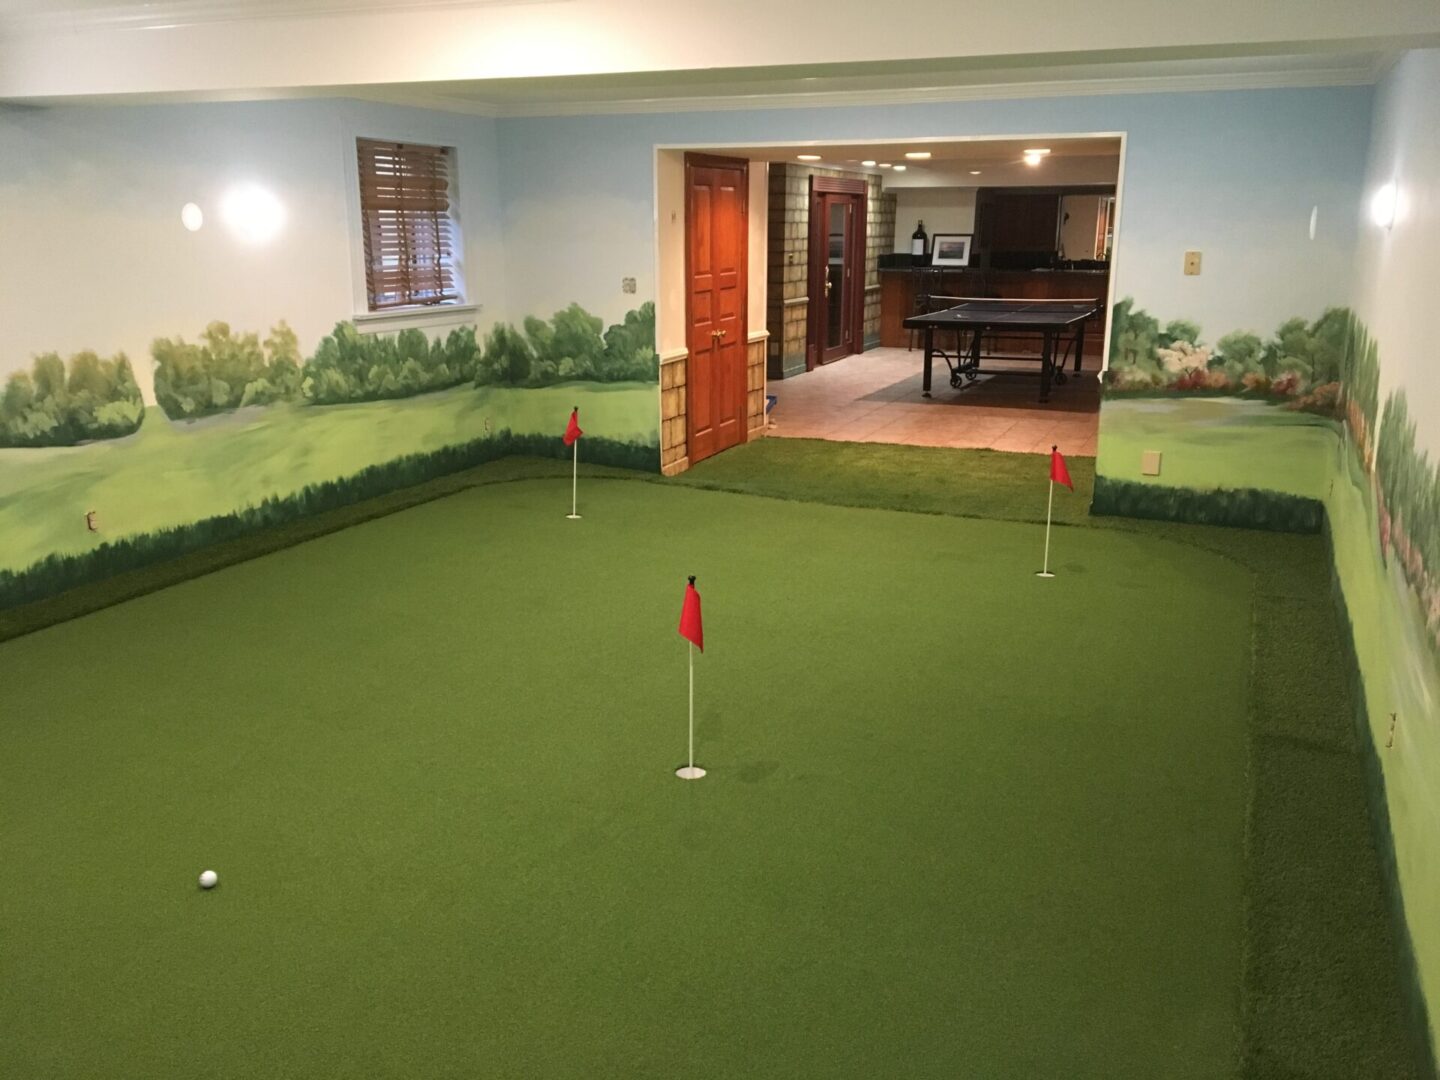 A room with a golf course and putting green.